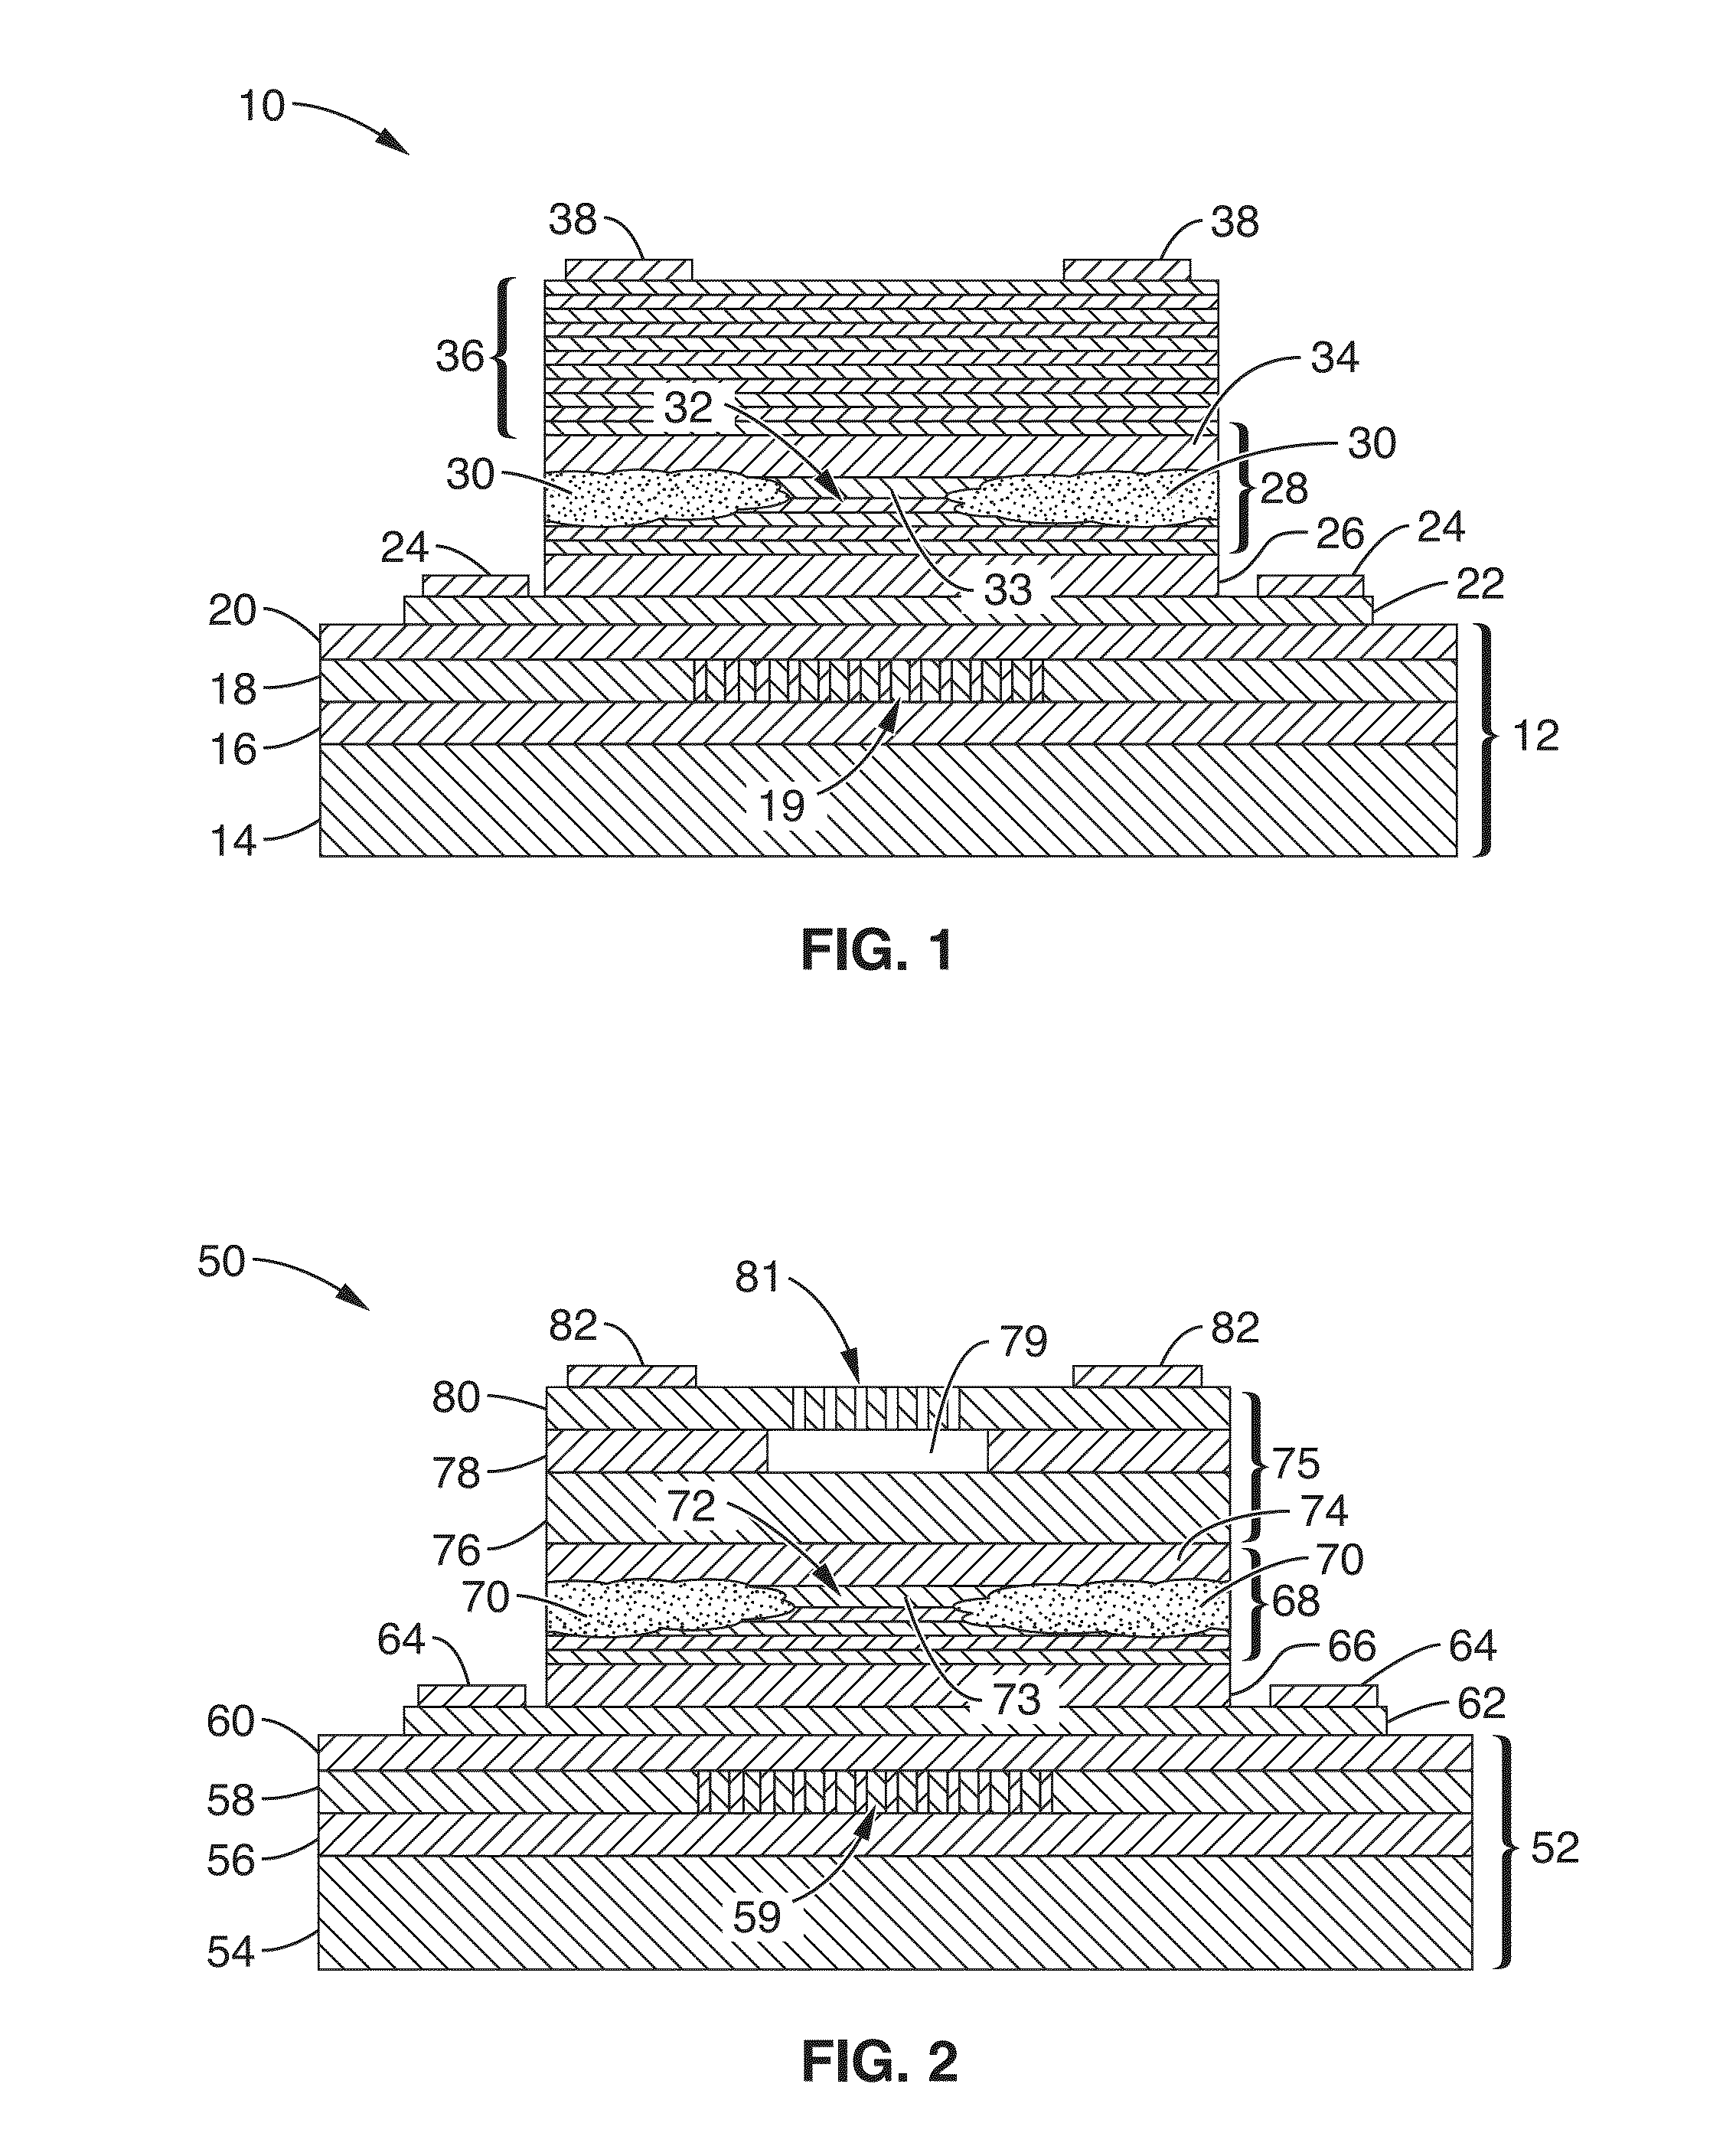 Vertical cavity surface emitting lasers with silicon-on-insulator high contrast grating